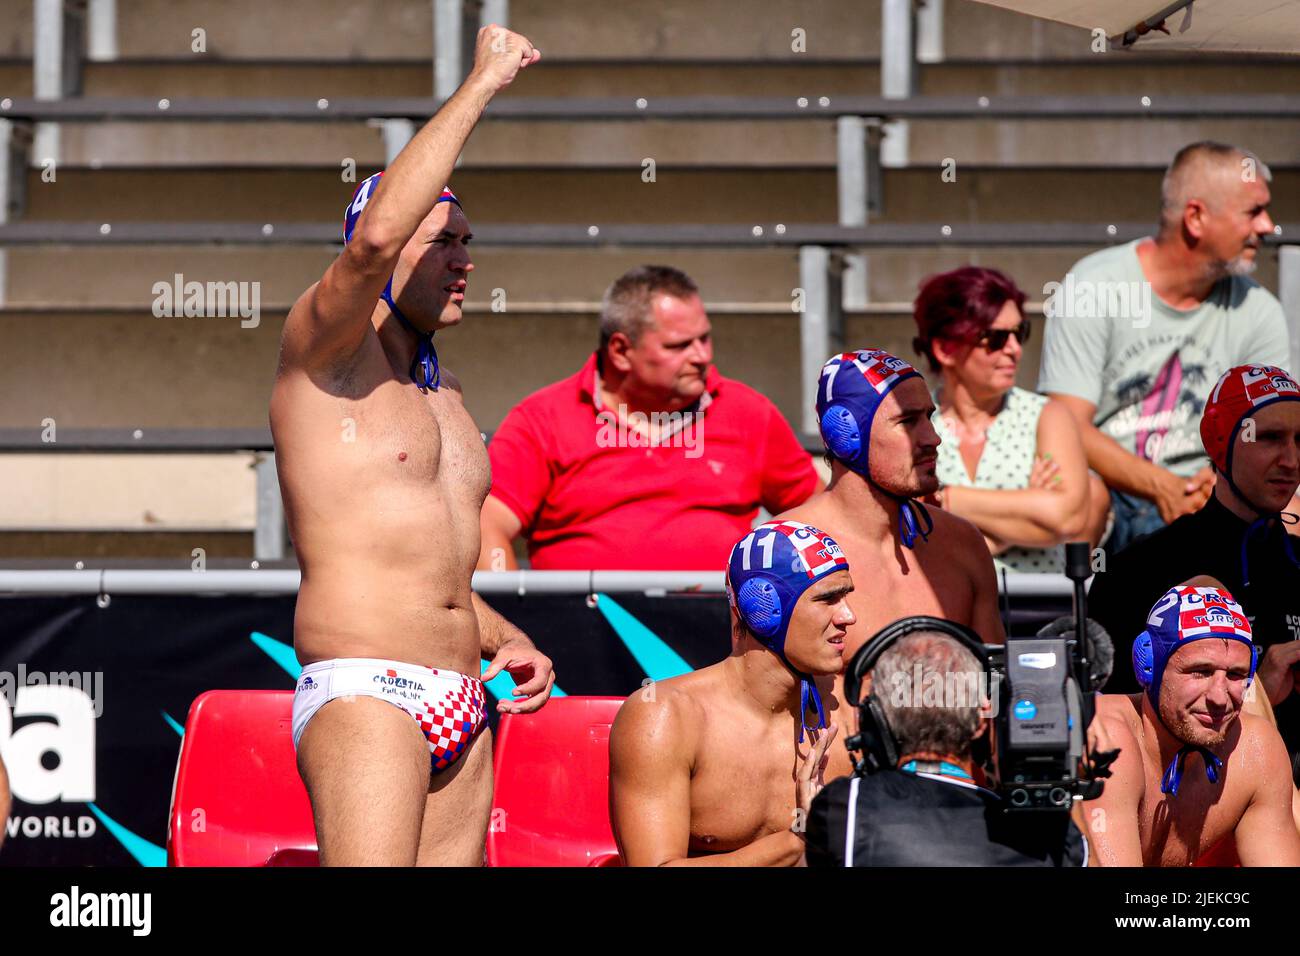 BUDAPEST, HUNGARY - JUNE 27: Ivan Krapic of Croatia cheering during the FINA World Championships Budapest 2022 1/8 finals match between Georgia and Croatia on June 27, 2022 in Budapest, Hungary (Photo by Albert ten Hove/Orange Pictures) Stock Photo